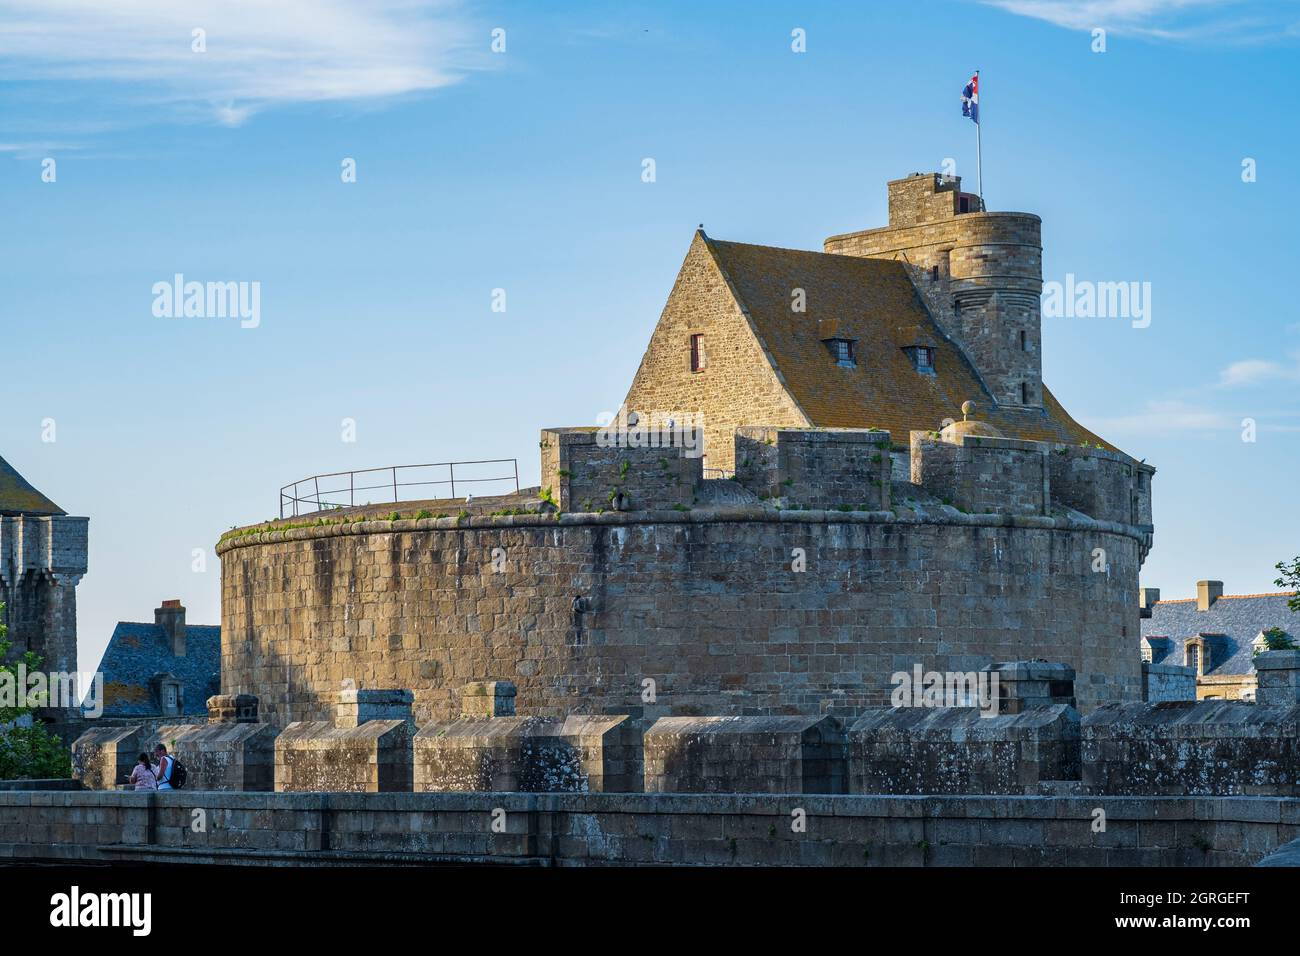 France, Ille-et-Vilaine, Saint-Malo intra-muros, the castle of Saint-Malo (15th century) houses the town hall and the Museum of the History of the City and the Malouin Country Stock Photo